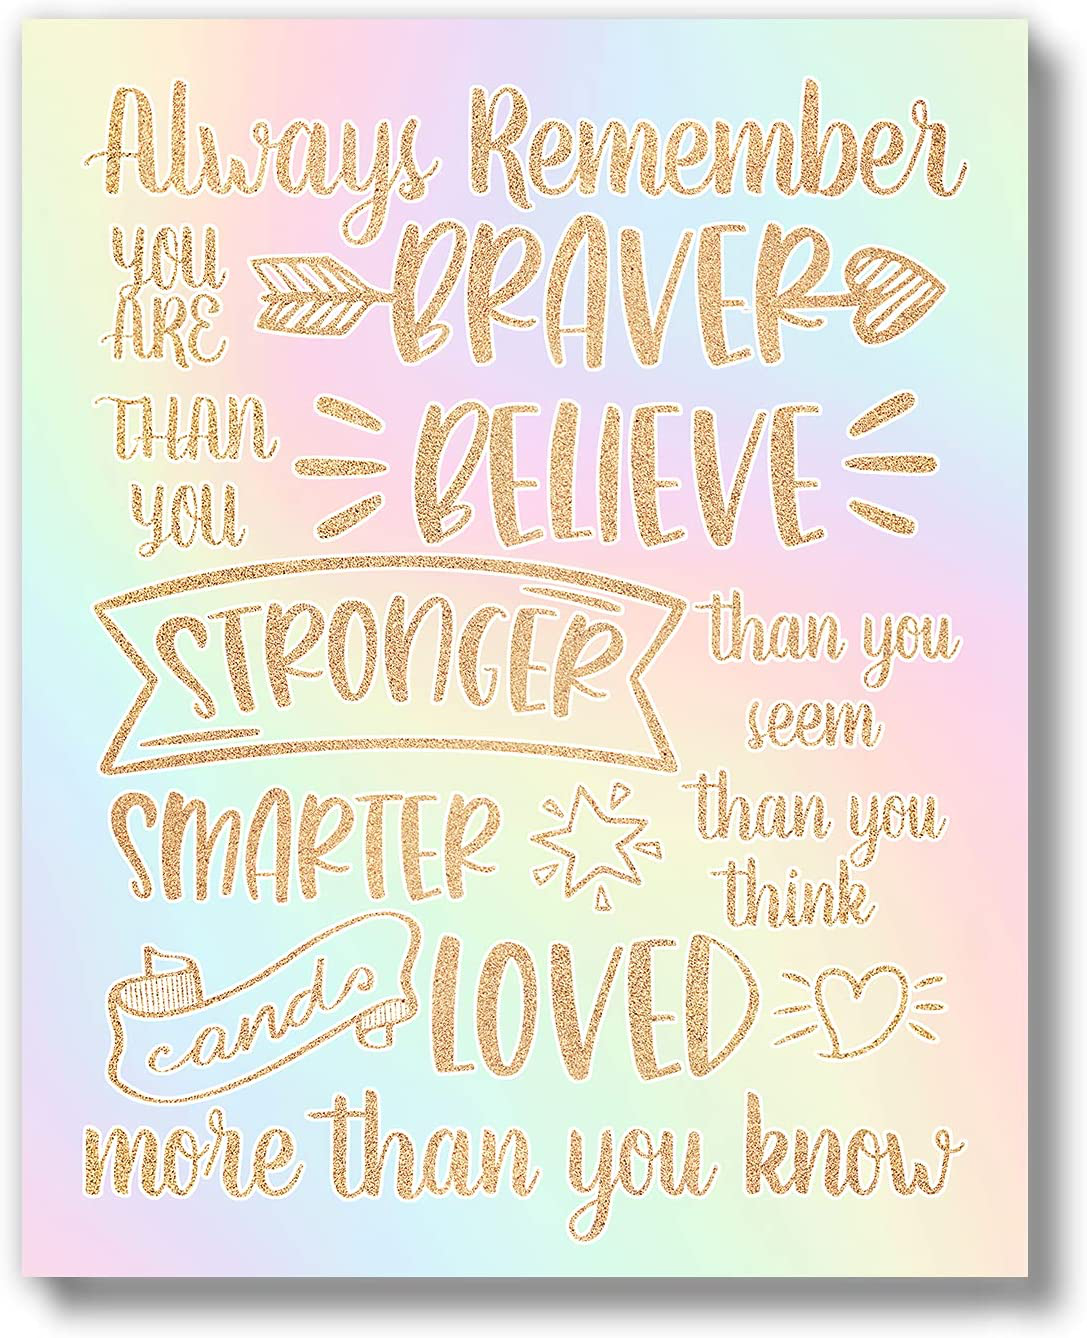 Brooke & Vine Girl Room Wall Decor Art Prints - (UNFRAMED 8 x 10) Inspirational Wall Art, Motivational Quotes Posters for Kids, Tween Bedroom, (Braver Than You Believe - Gold and Rainbow)